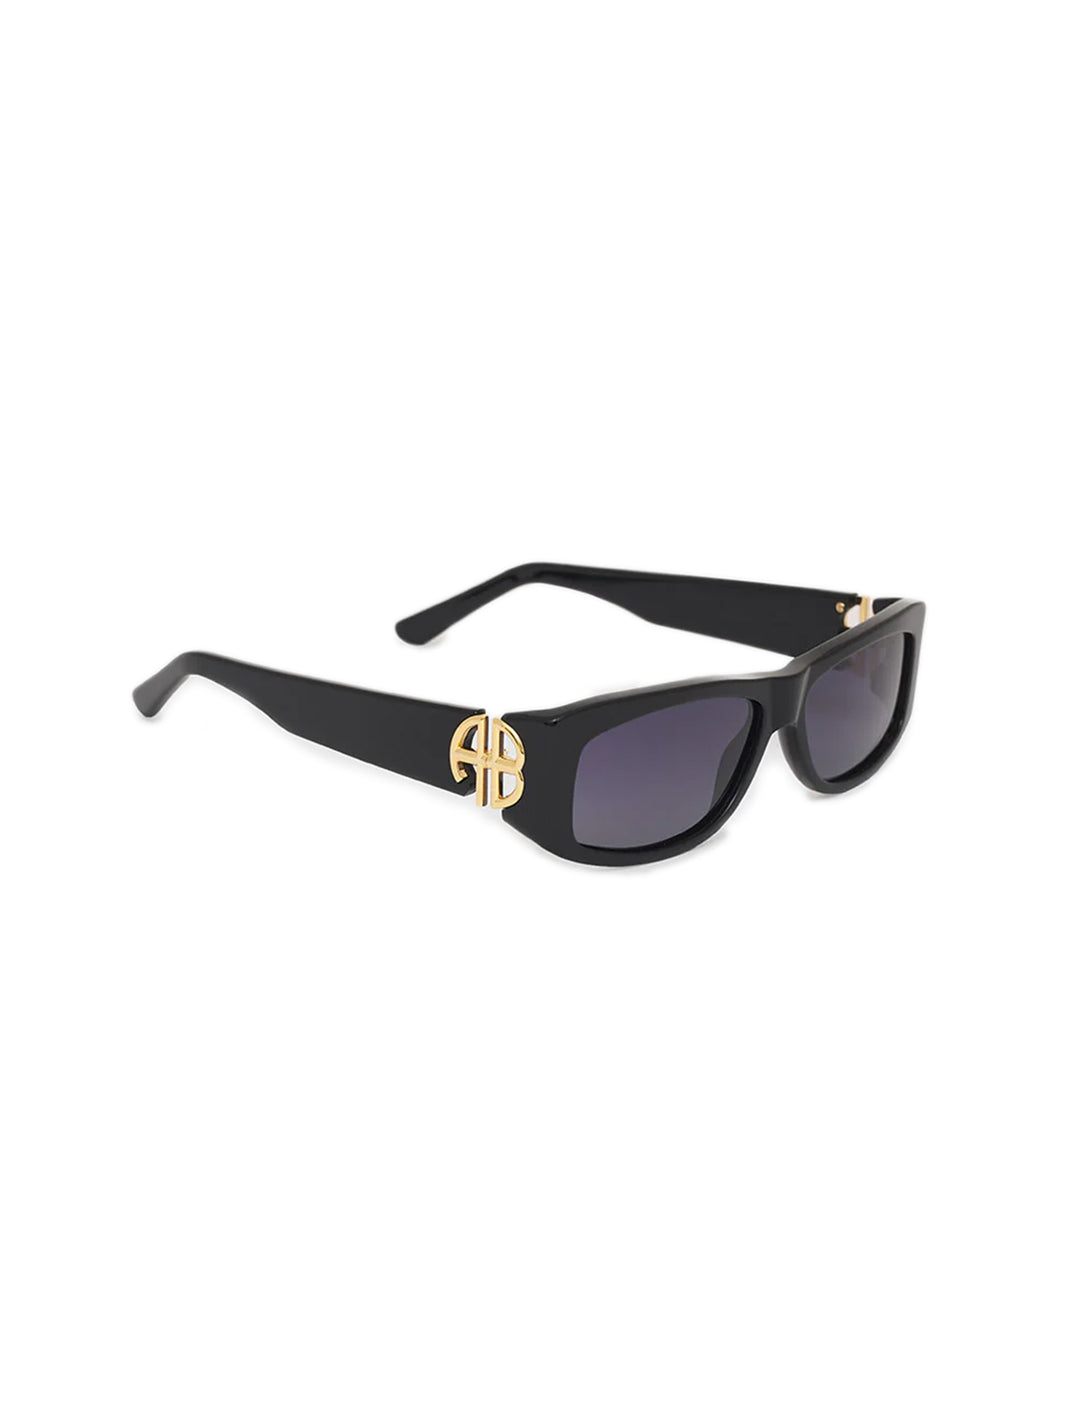 Side angle view of Anine Bing's siena sunglasses in black and gold.